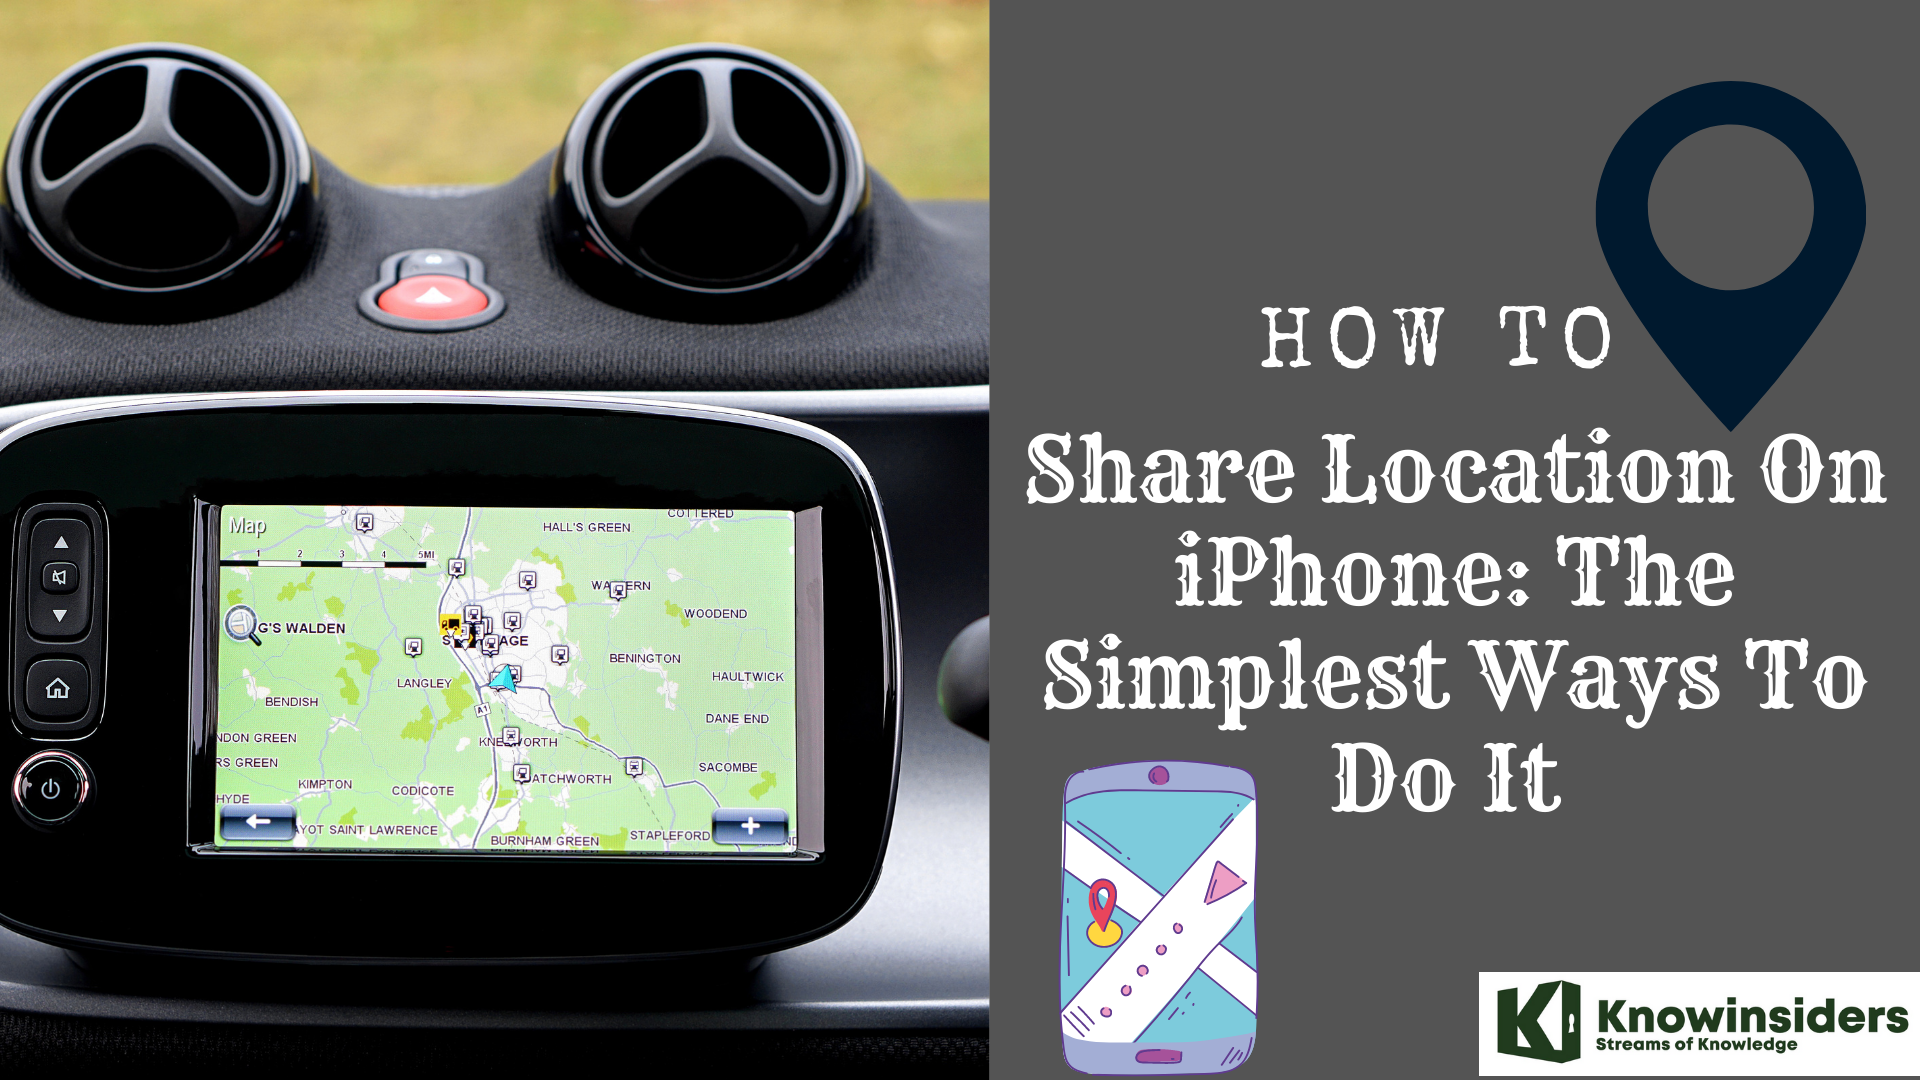 How To Share Location on iPhone - iMessage, Google Maps and Apple Maps